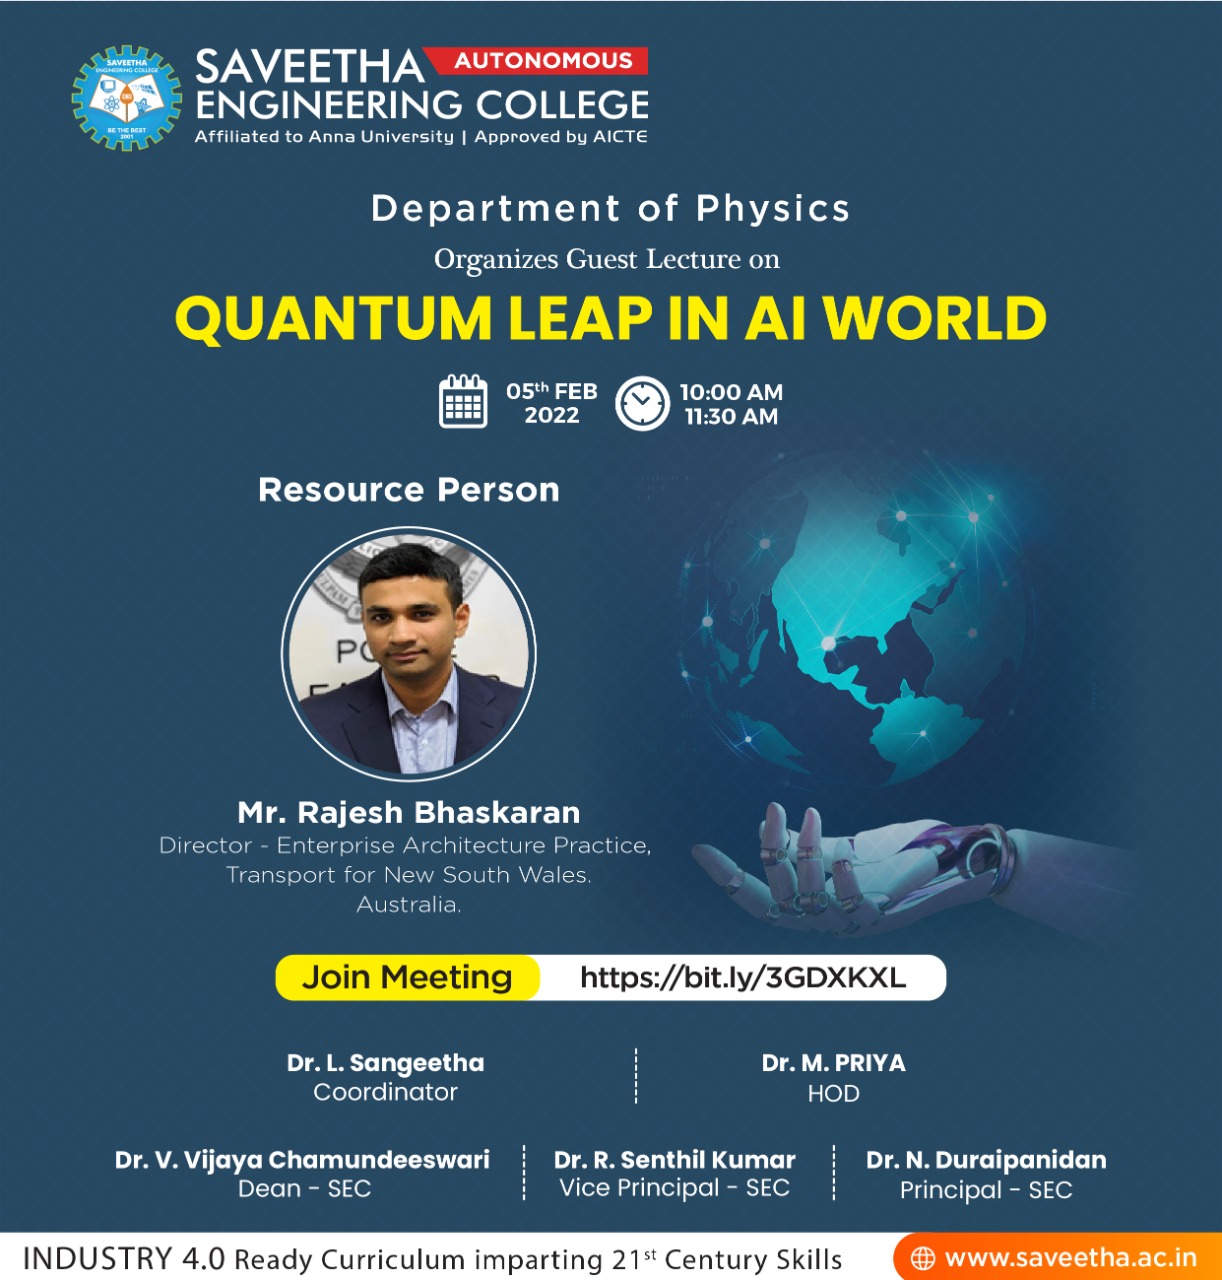 Webinar conducted by department Physics of Saveetha Engineering College